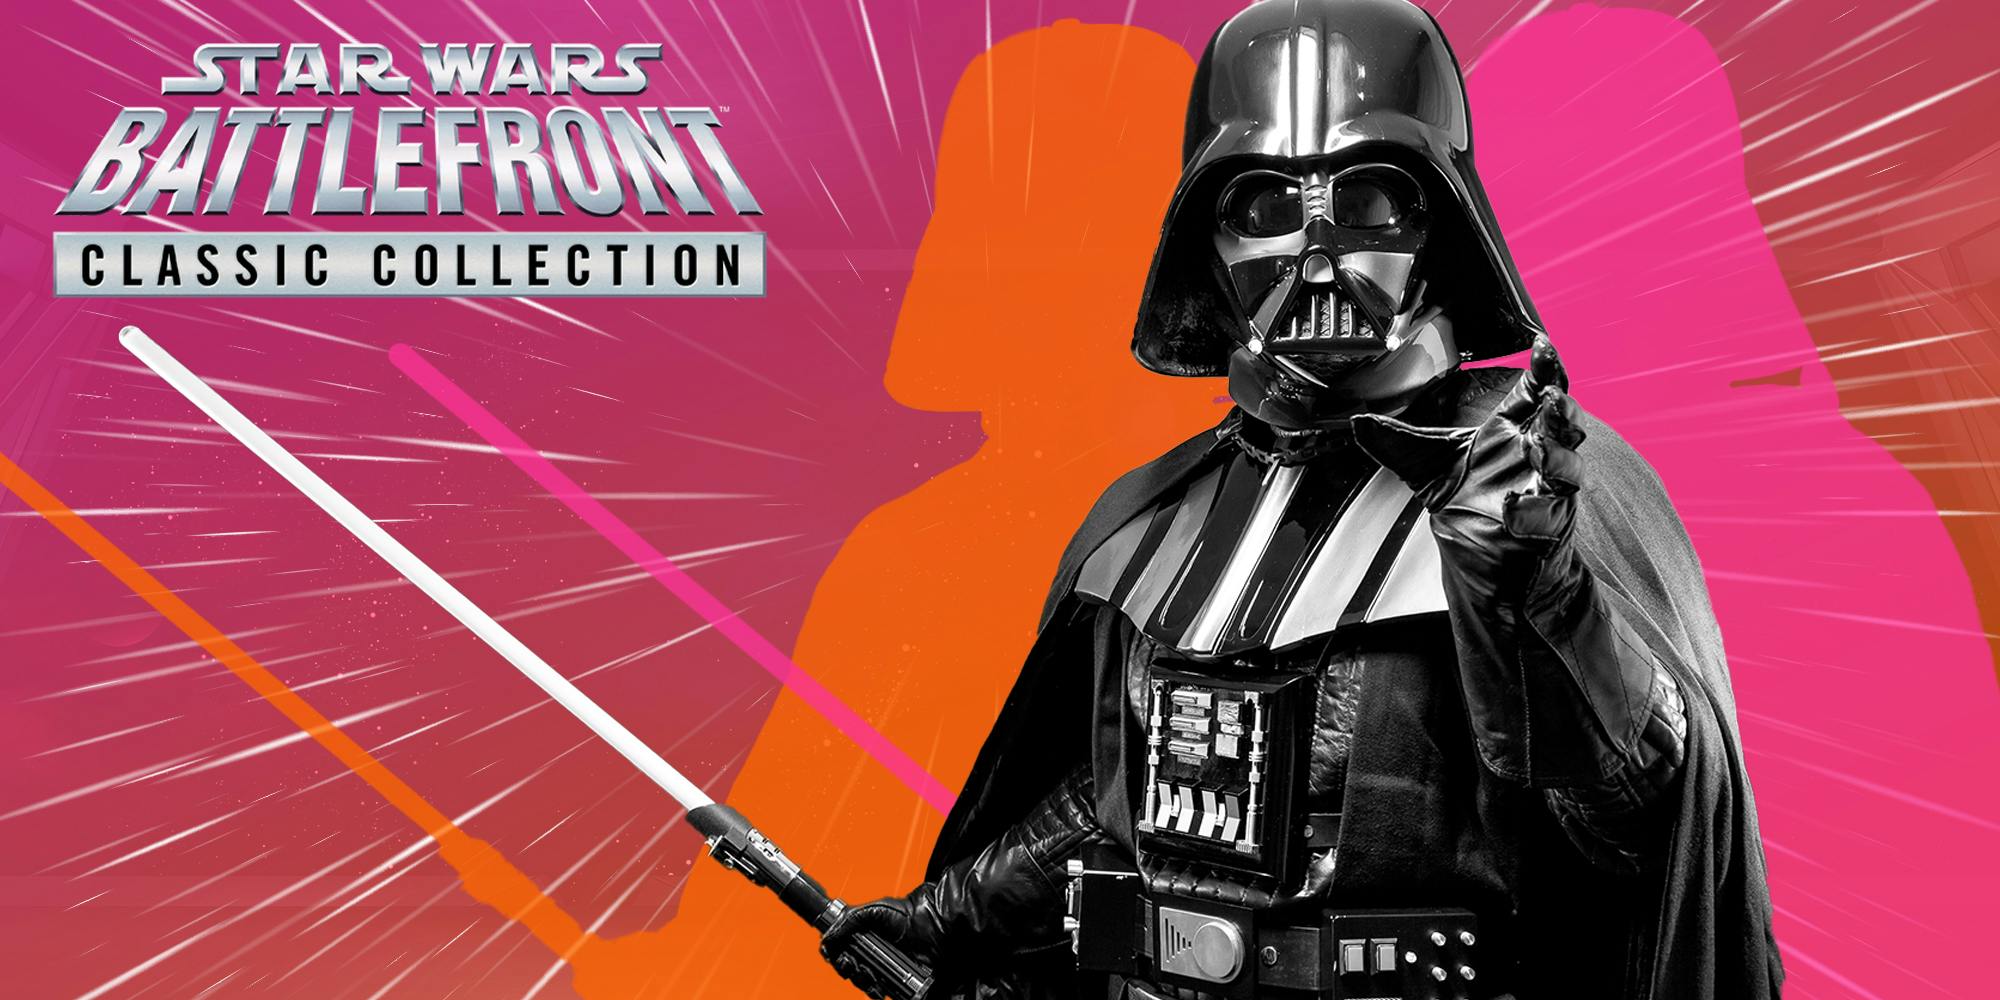 star wars battle front classic collection logo next to an image of darth vader